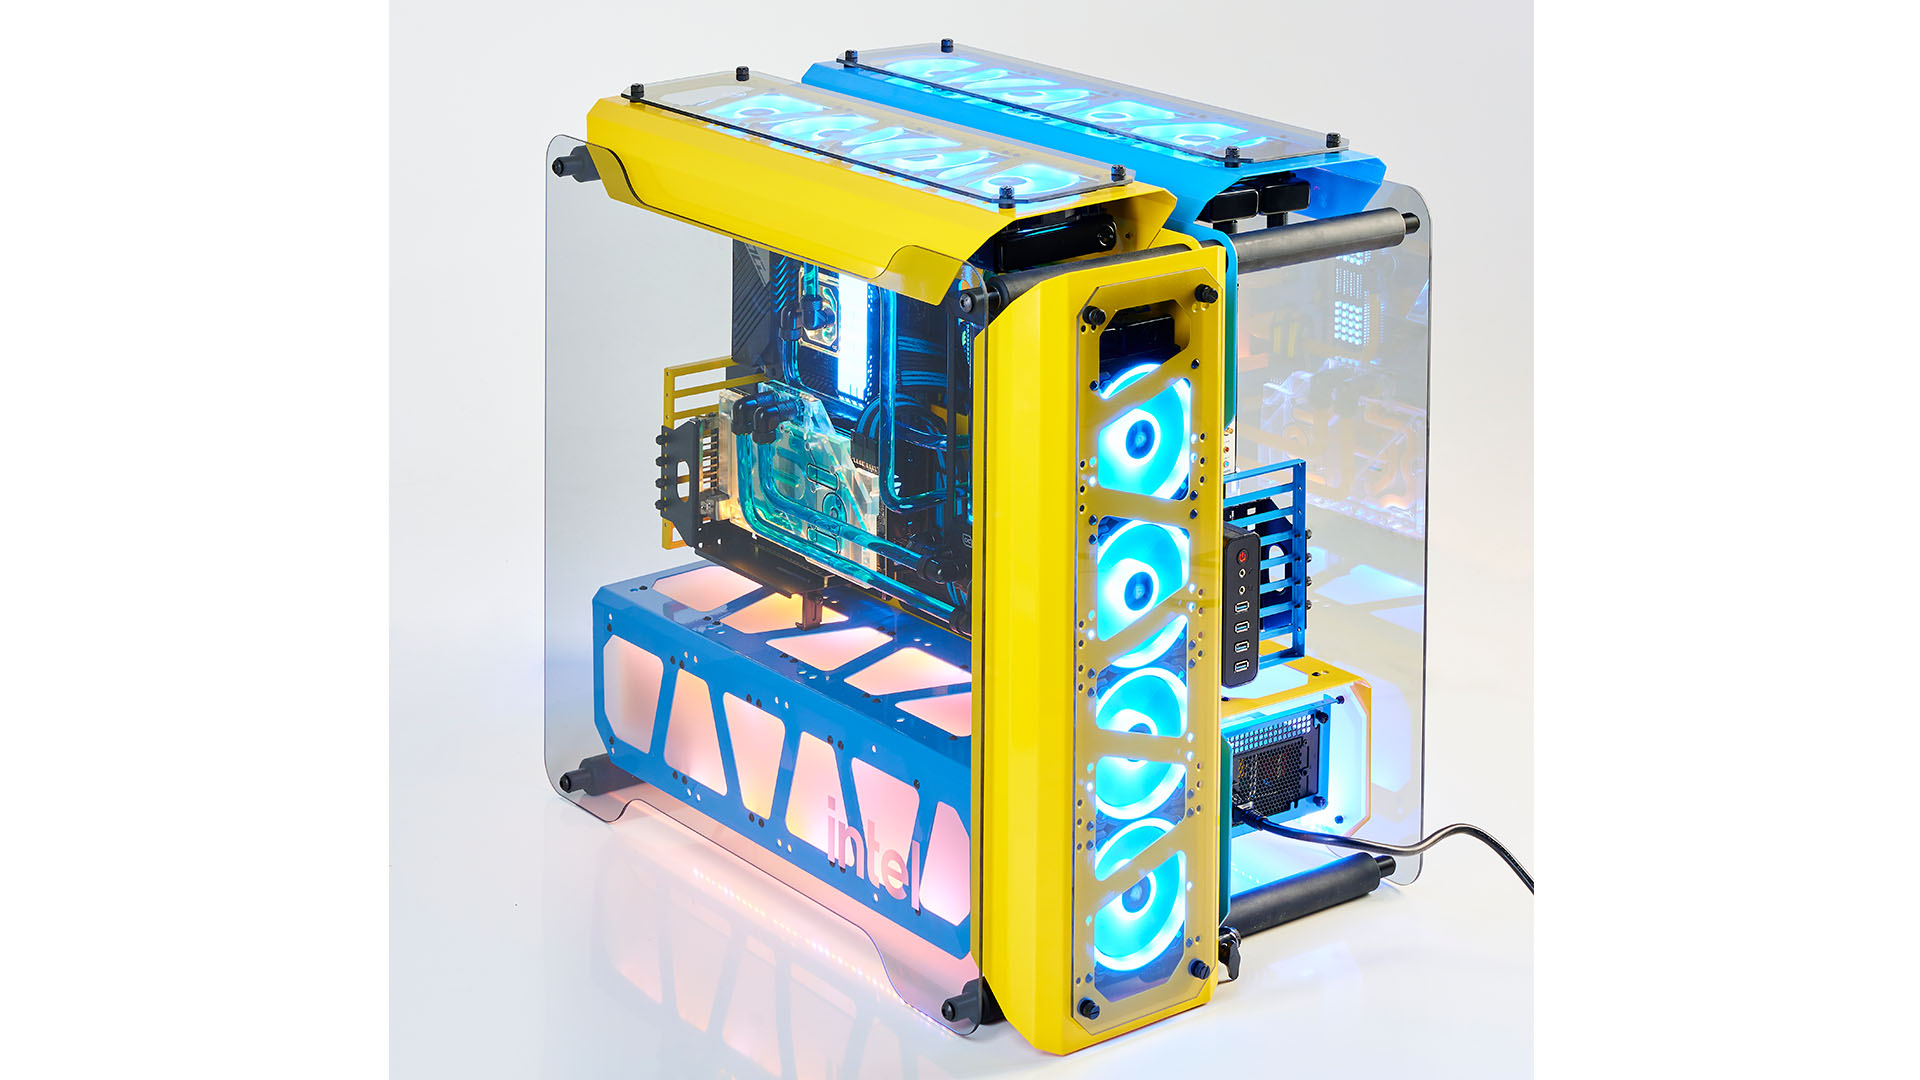 The dual system in the Intel blue and yellow case